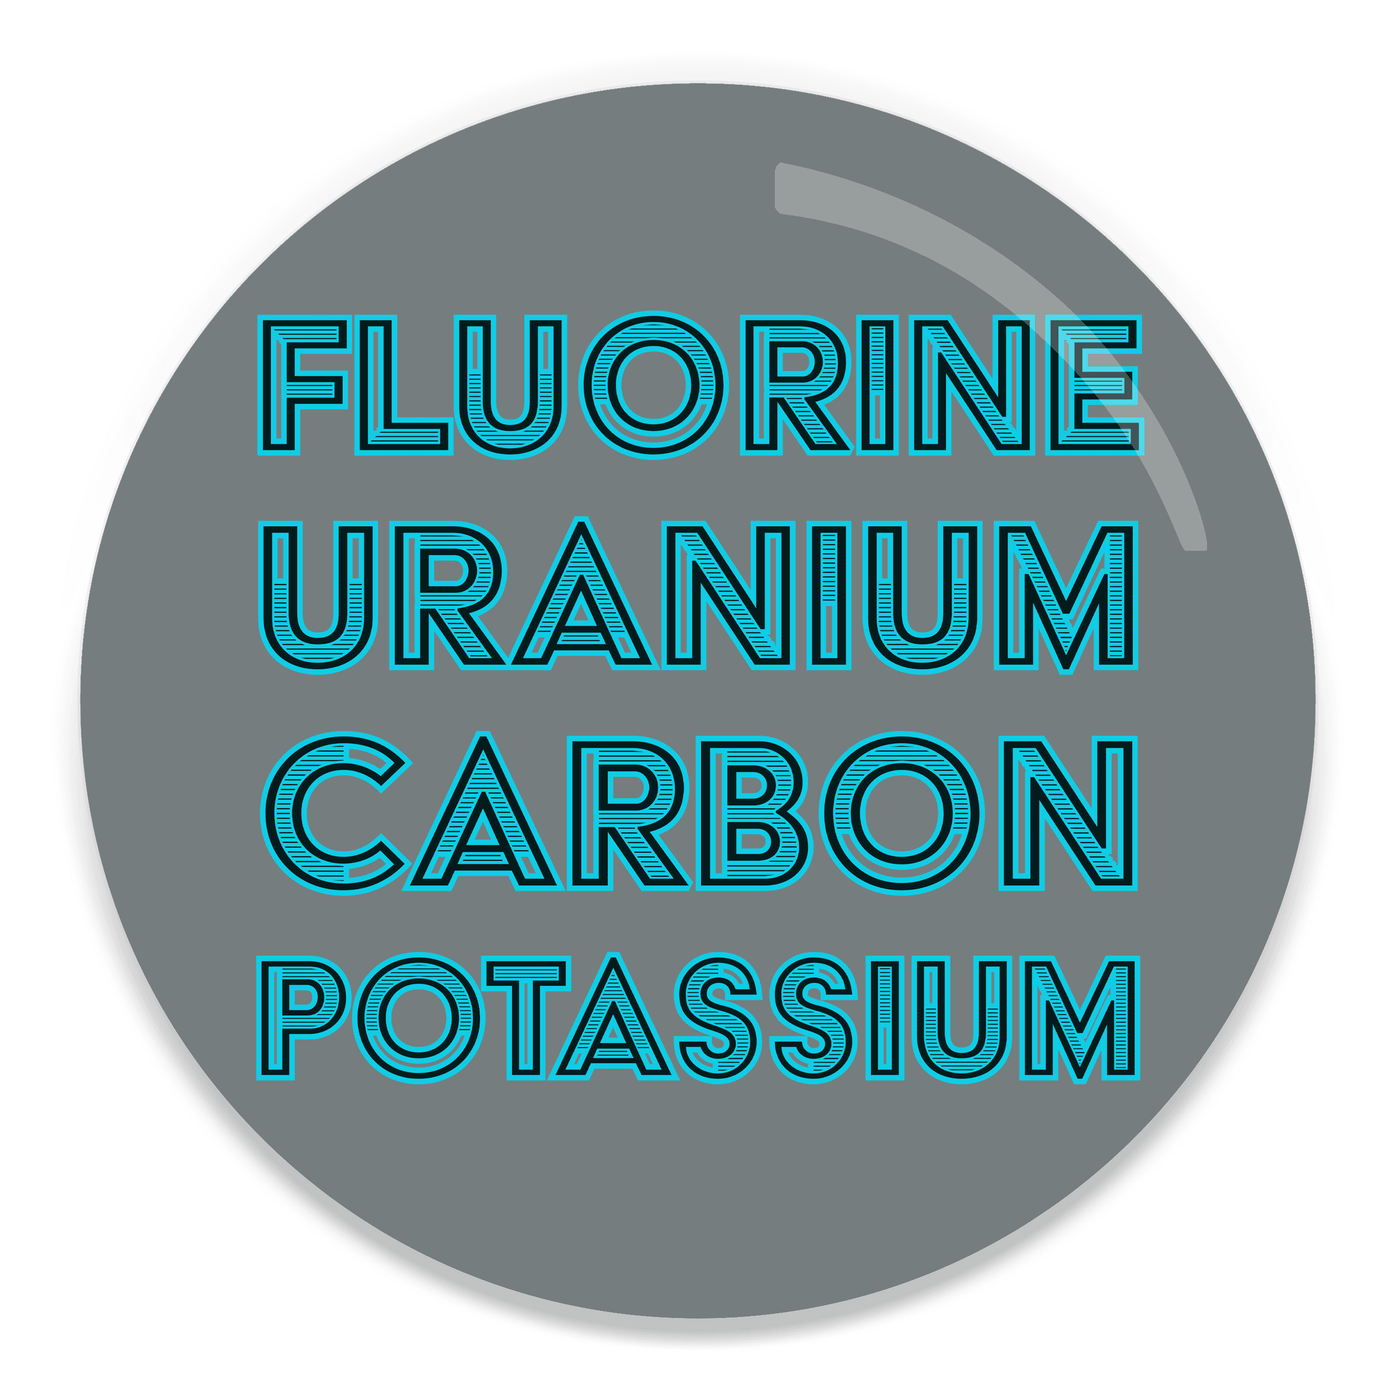 2.25 inch round colorful magnet with image of text saying fluorine uranium carbon potassium